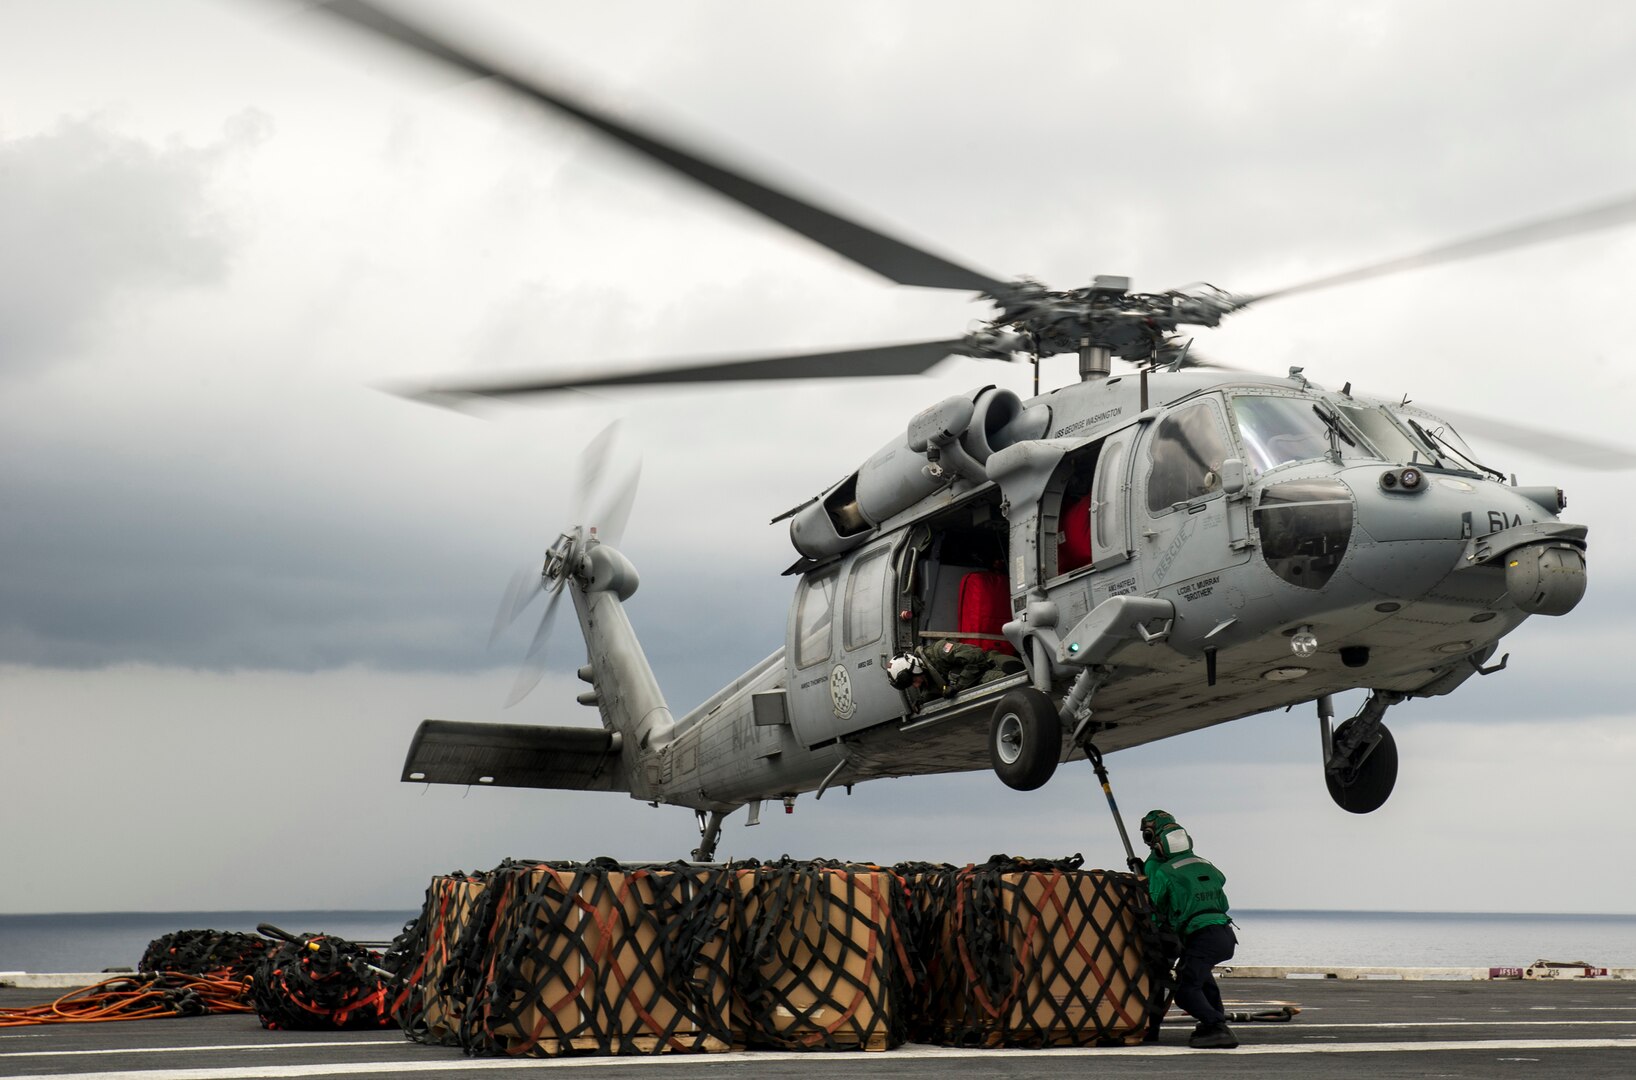 Navy logisticians attach cargo legs to an MH-60S Seahawk during a replenishment-at-sea between the Military Sealift Command fleet replenishment oiler USNS Guadalupe and aircraft carrier USS George Washington. DLA delivered more than a million pounds of food to three South American countries for the GW to resupply during its voyage from San Diego to Norfolk, Virginia.